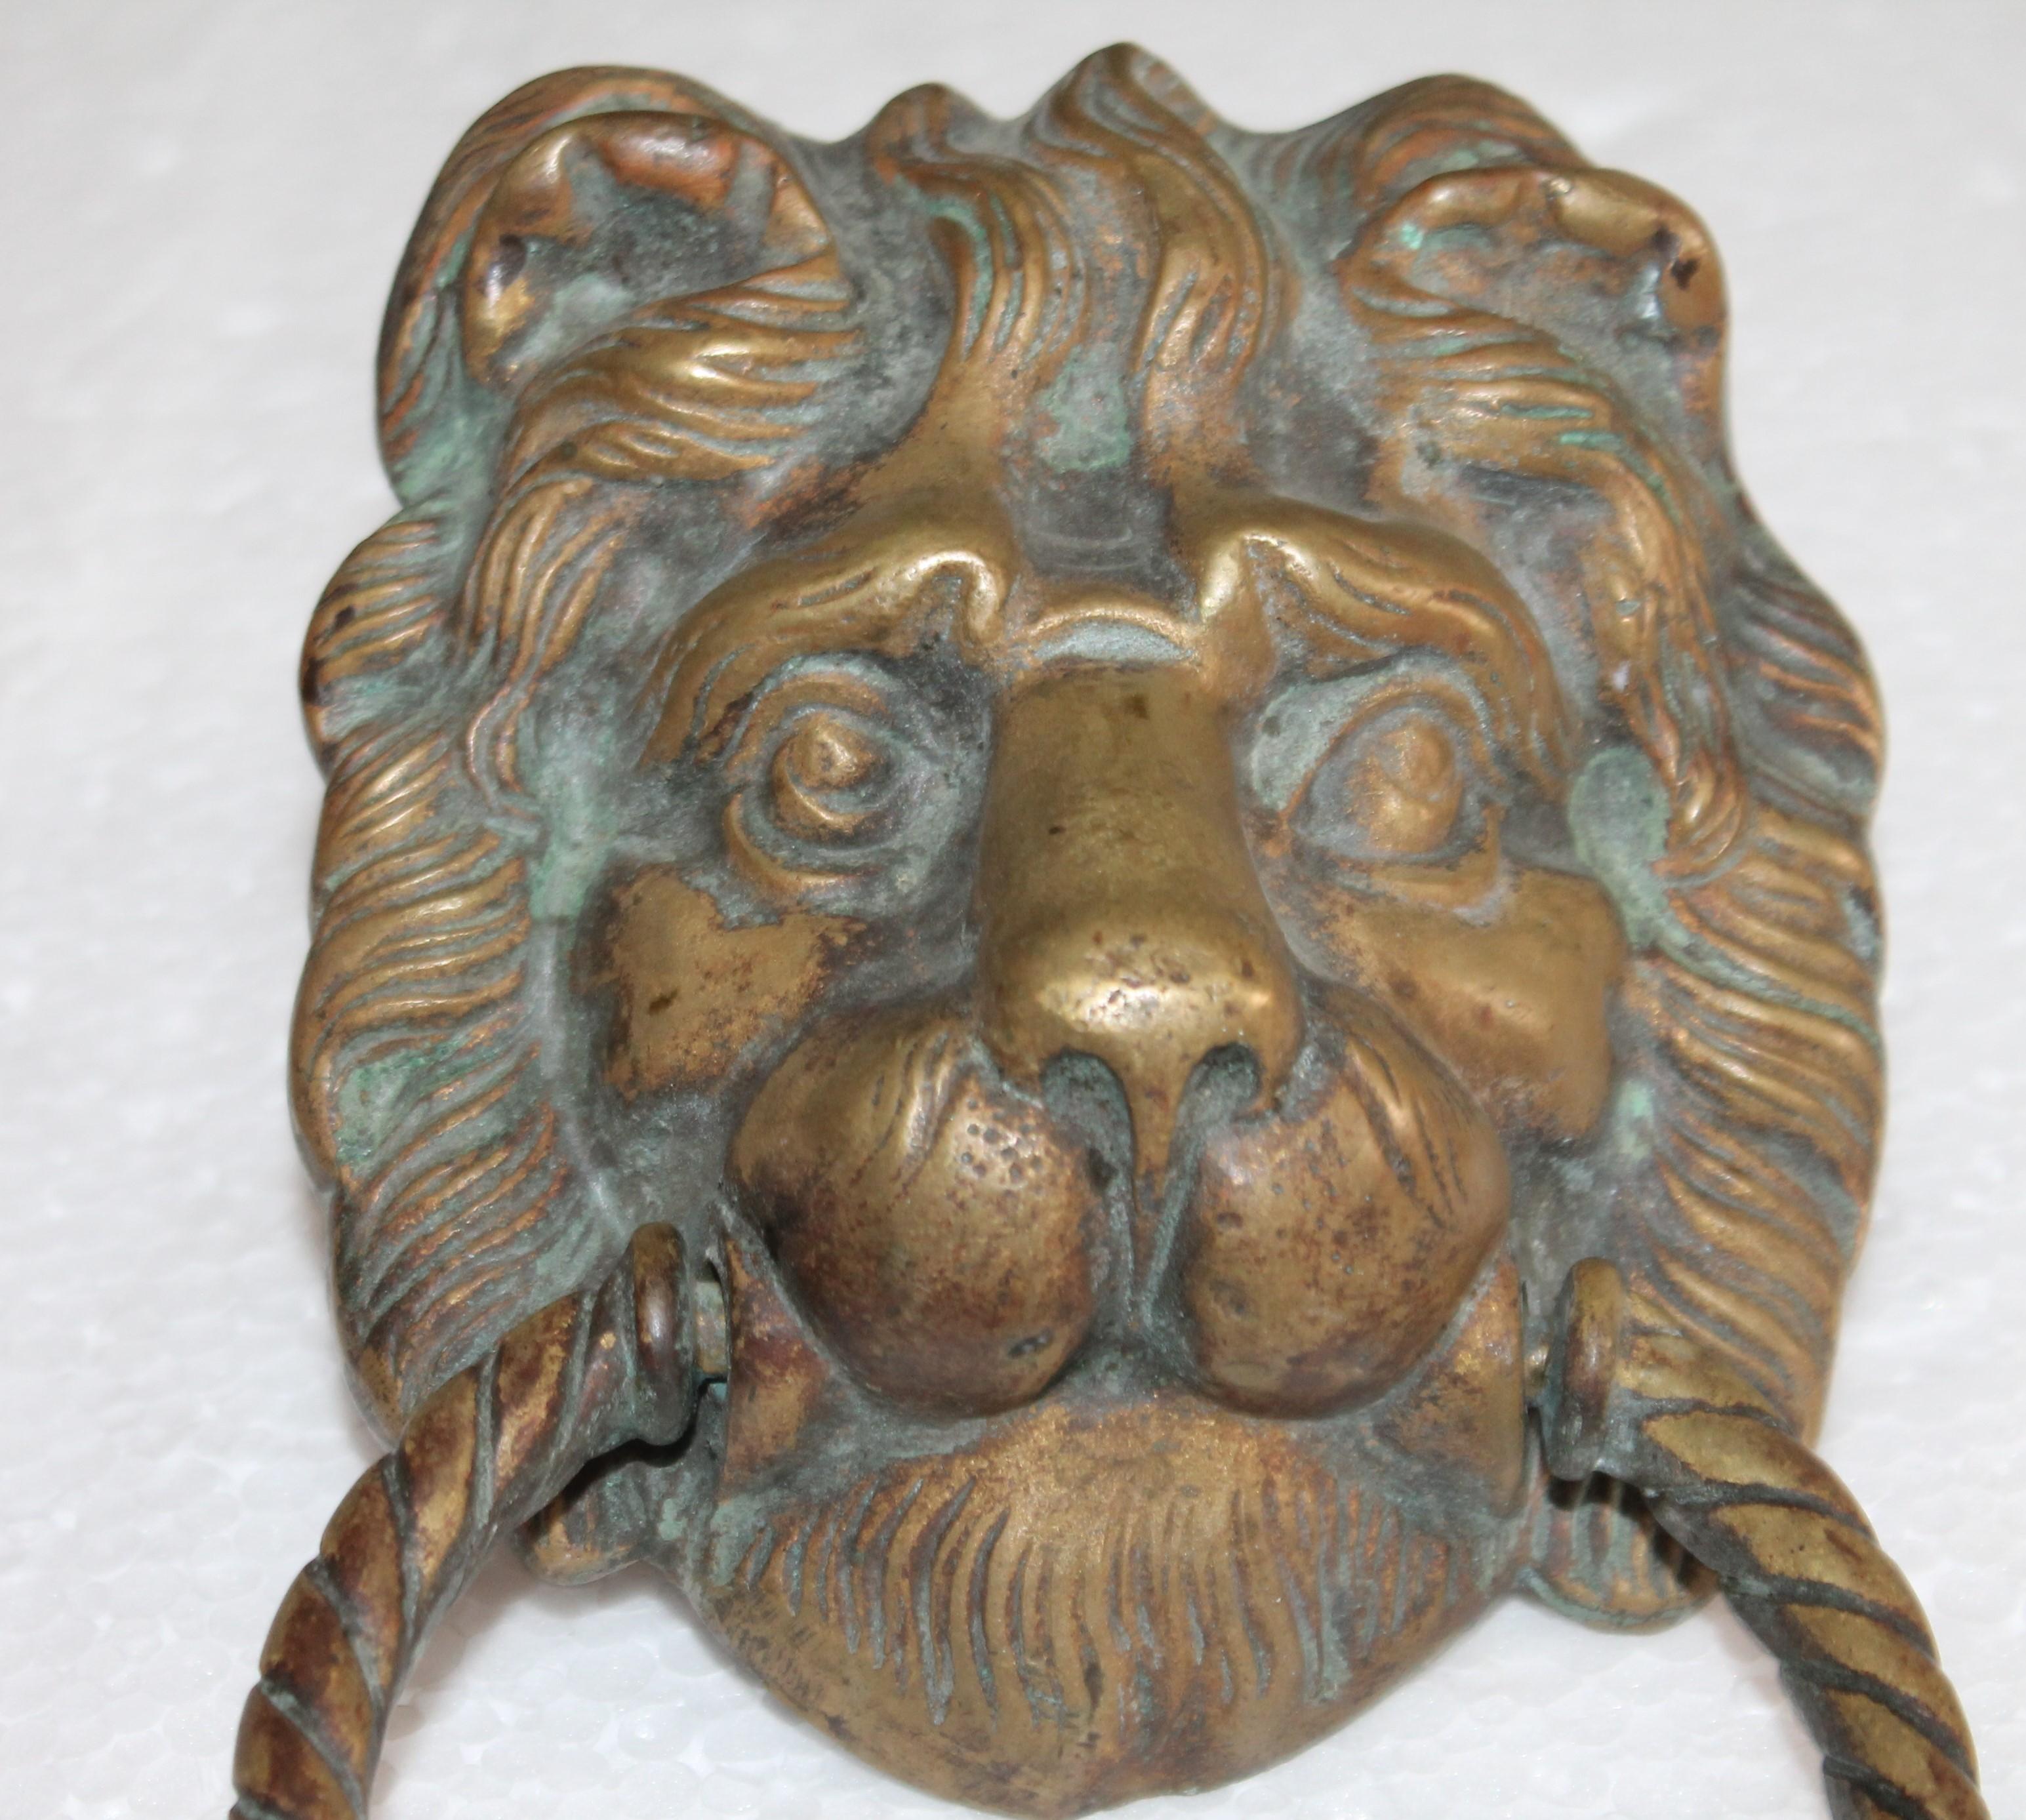 This large brass lion head door knocker is in great condition and was found in New England. The condition is very good.